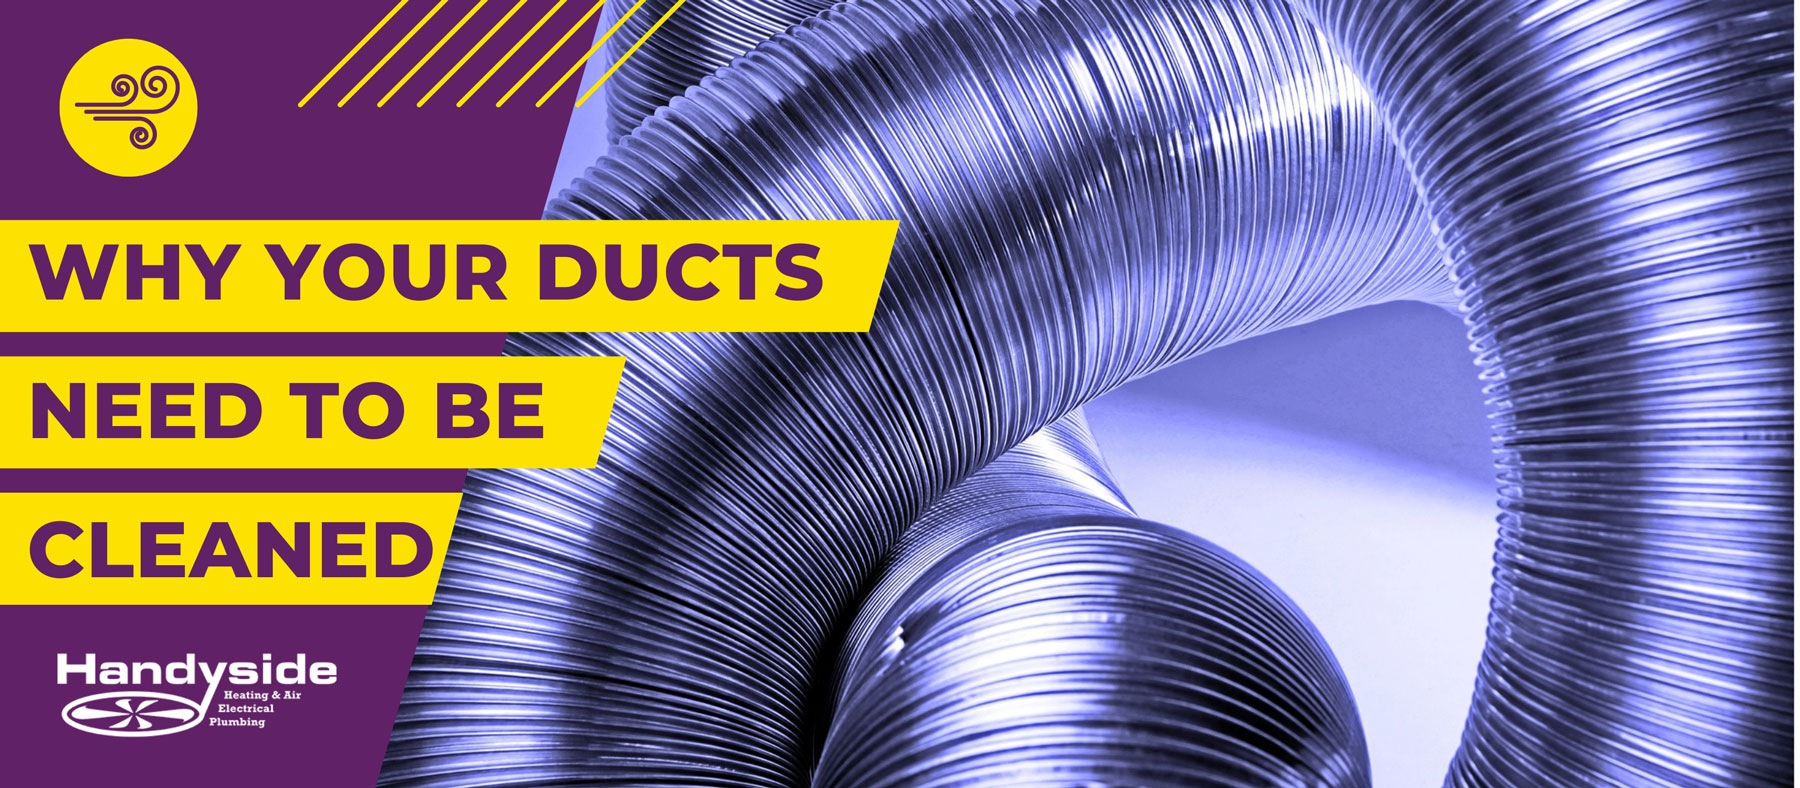 Why your ducts need to be cleaned